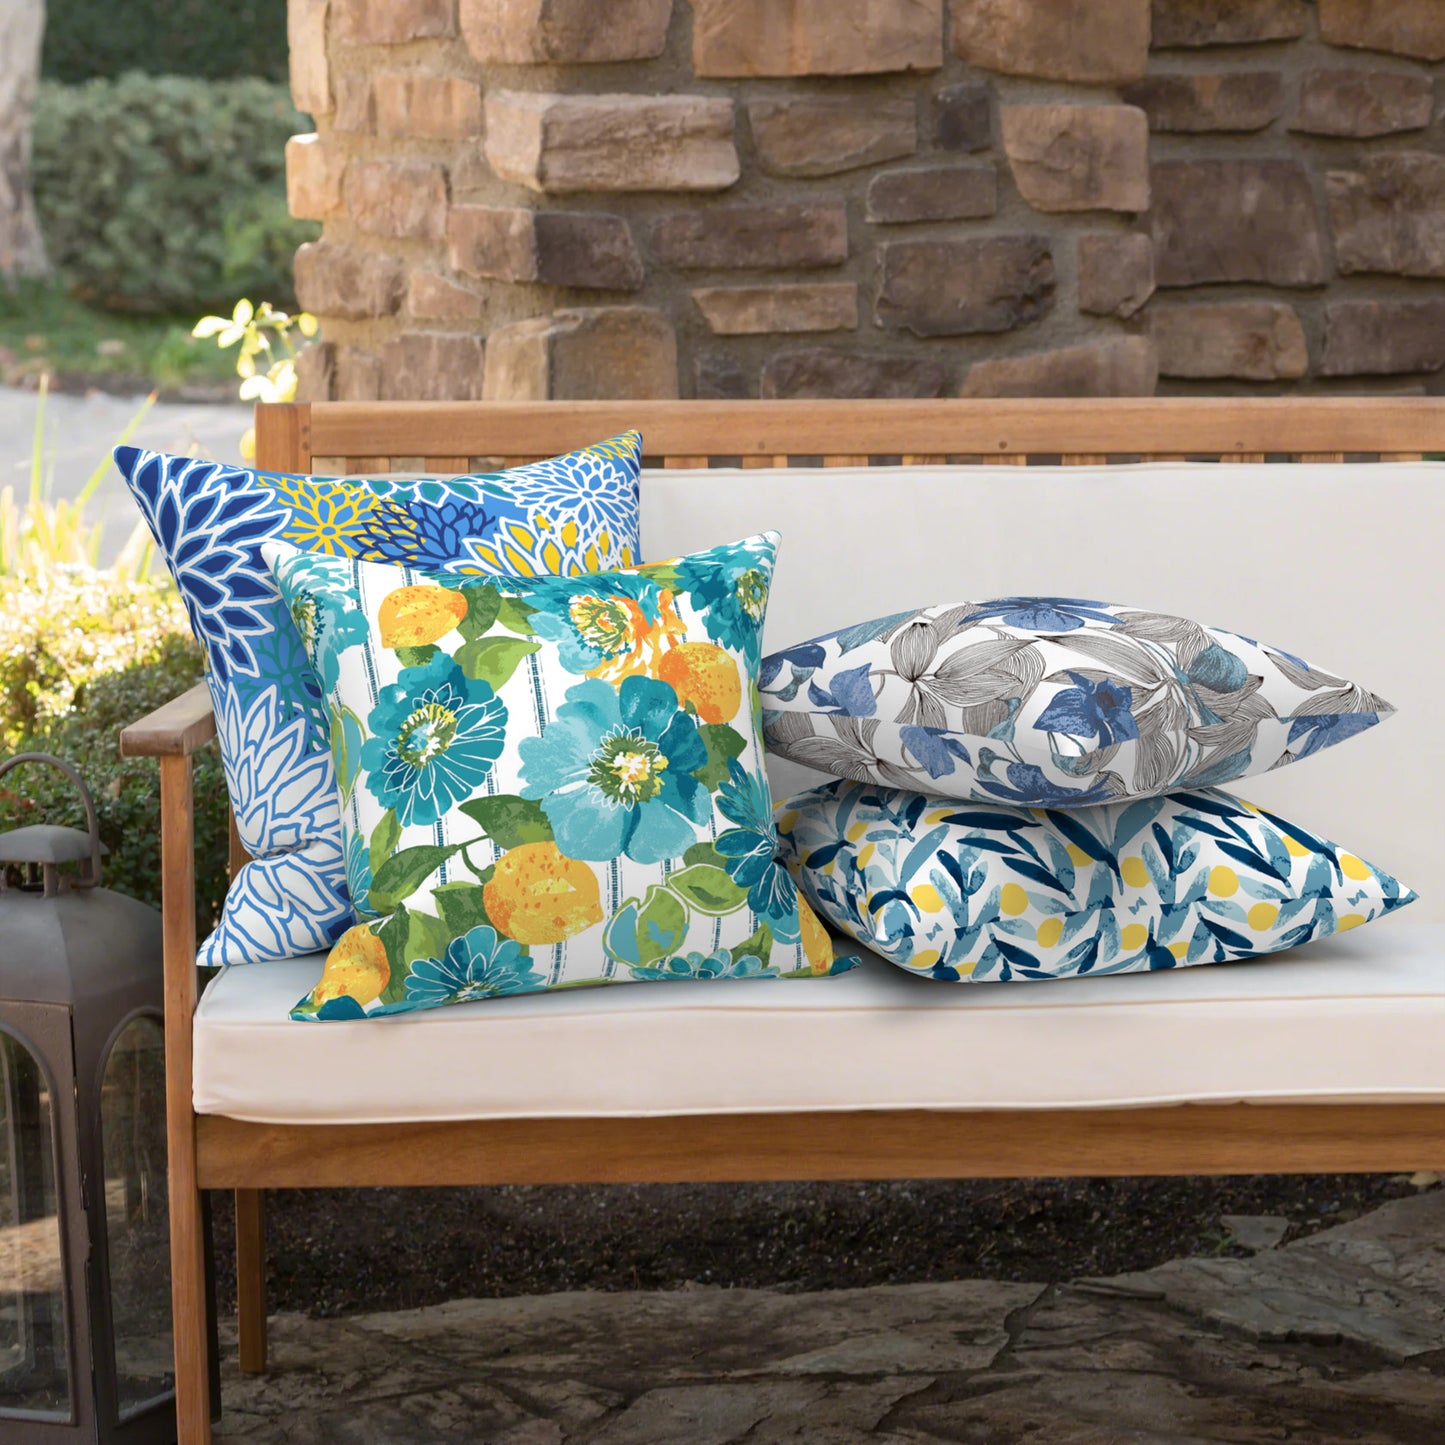 Melody Elephant Outdoor Throw Pillows 16x16 Inch, water Repellent patio pillows with Inners set of 2, outdoor pillows for patio furniture home garden, Clemens Blue